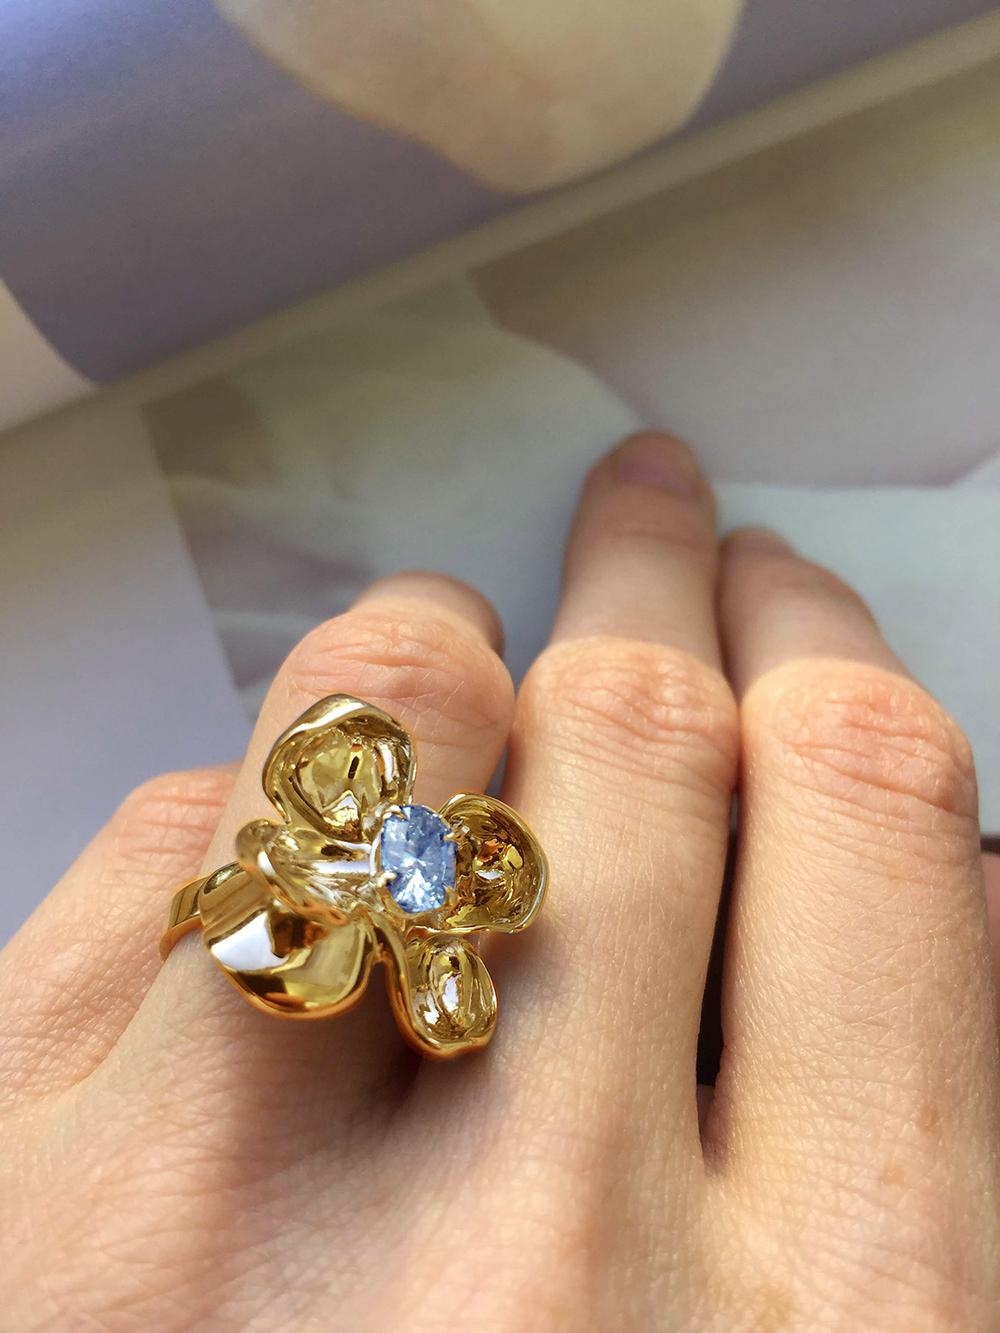 This Magnolia Flower contemporary engagement or cocktail ring is in 18 karat yellow gold with clear and shiny light blue sapphire, 0.65 Carats. The water-surface of the gem multiplies the light, mirroring on the golden petals. The weight of the ring